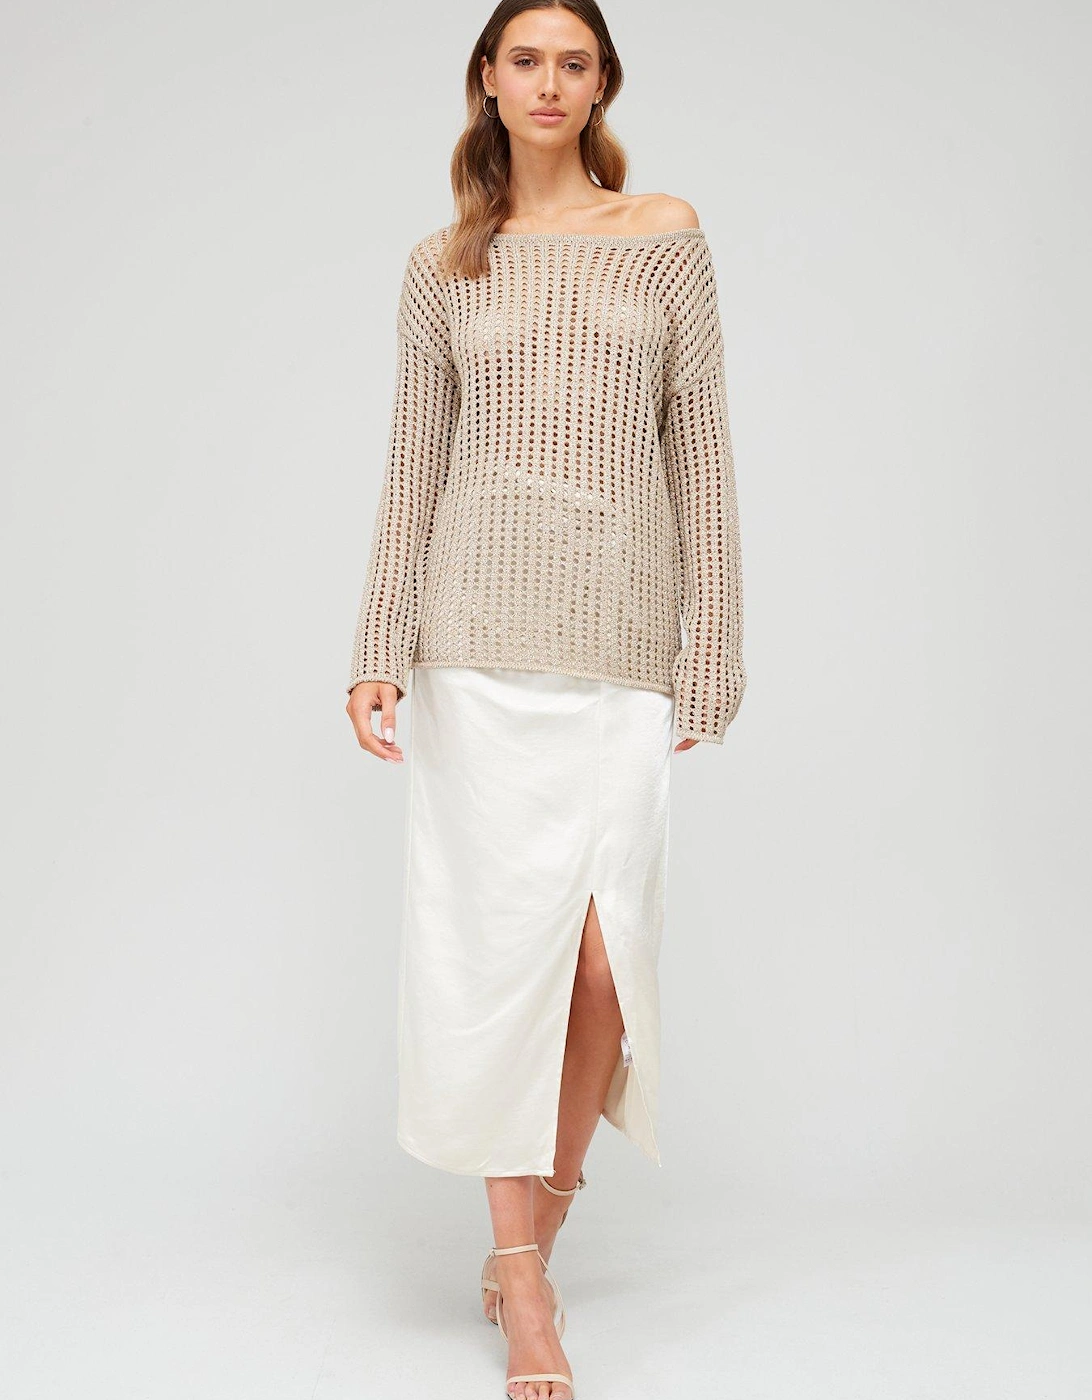 Ruched Midaxi Skirt - White